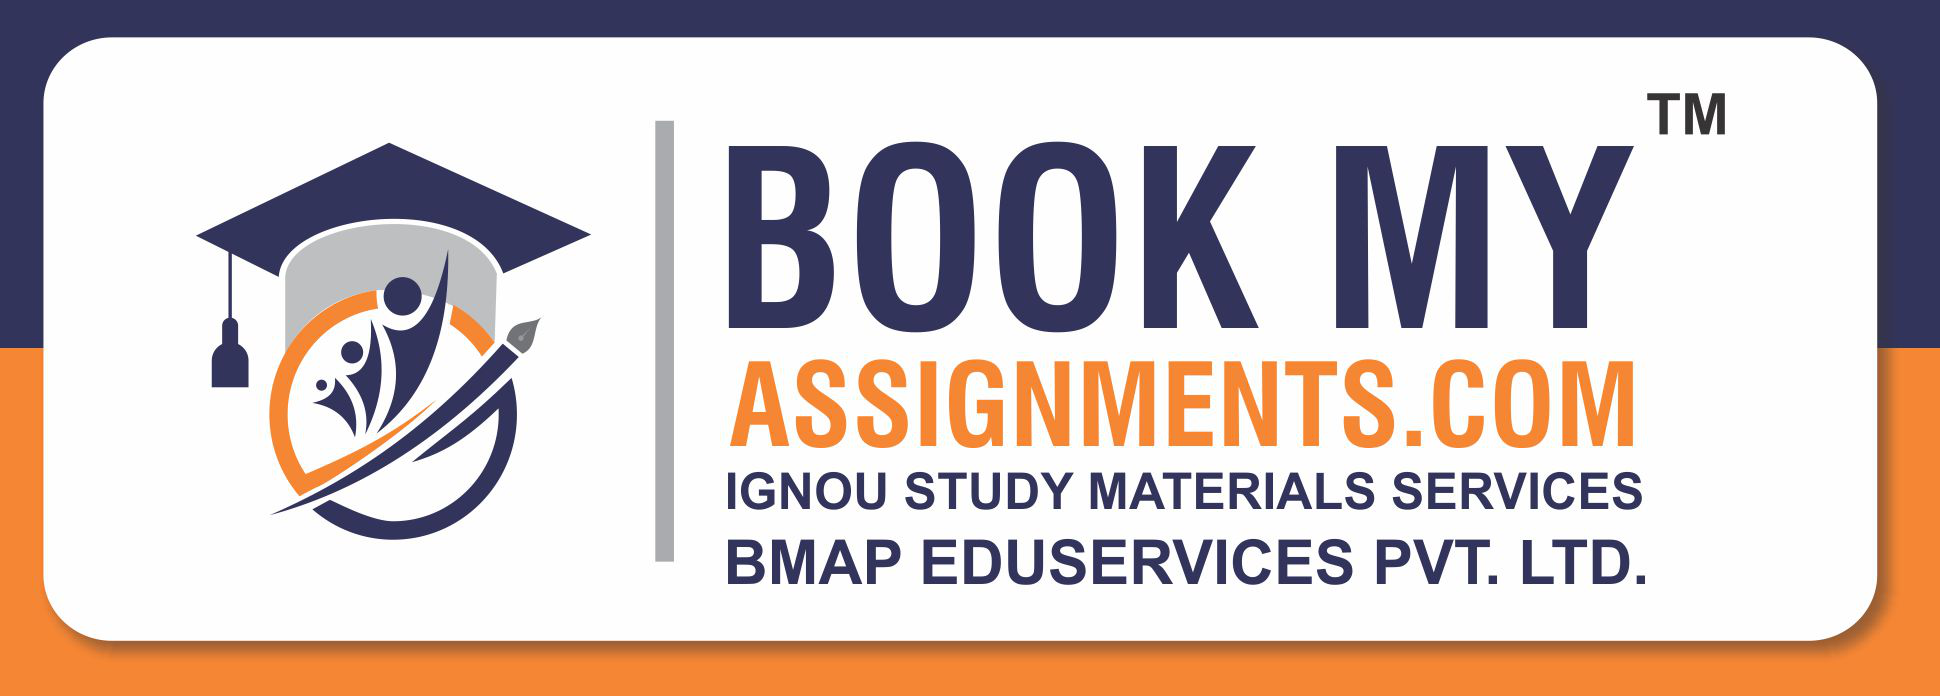 Bookmyassignments